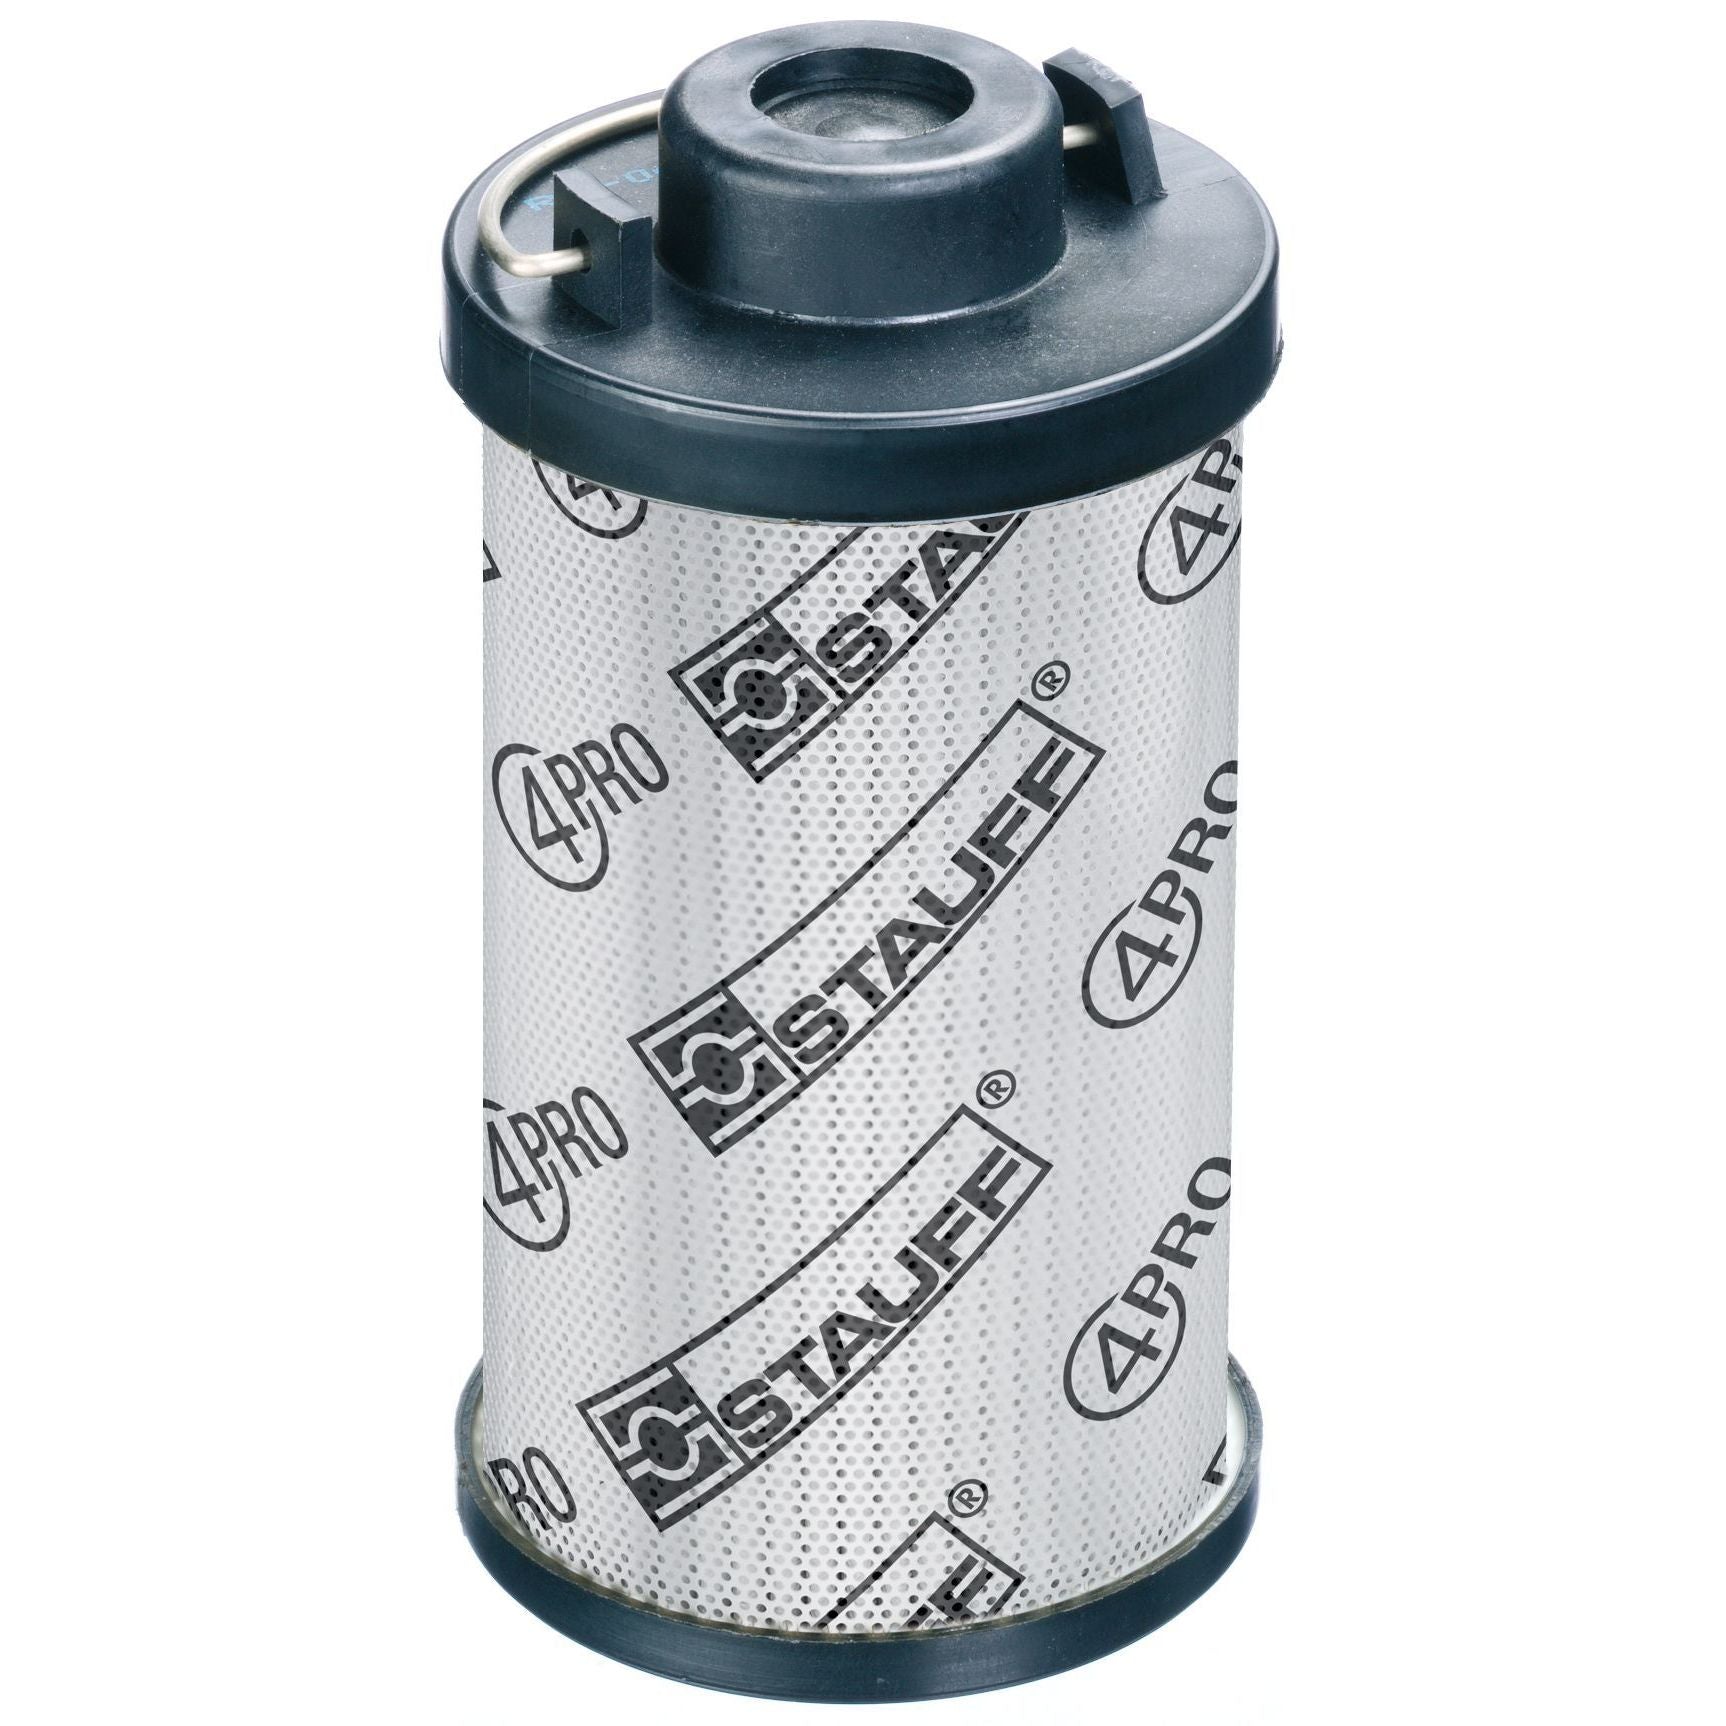 RE-130-G-03-B-B3/4 : Stauff RF-130 Series Filter Element, 3 Micron, Synthetic, 363psi Collapse Differential, Buna